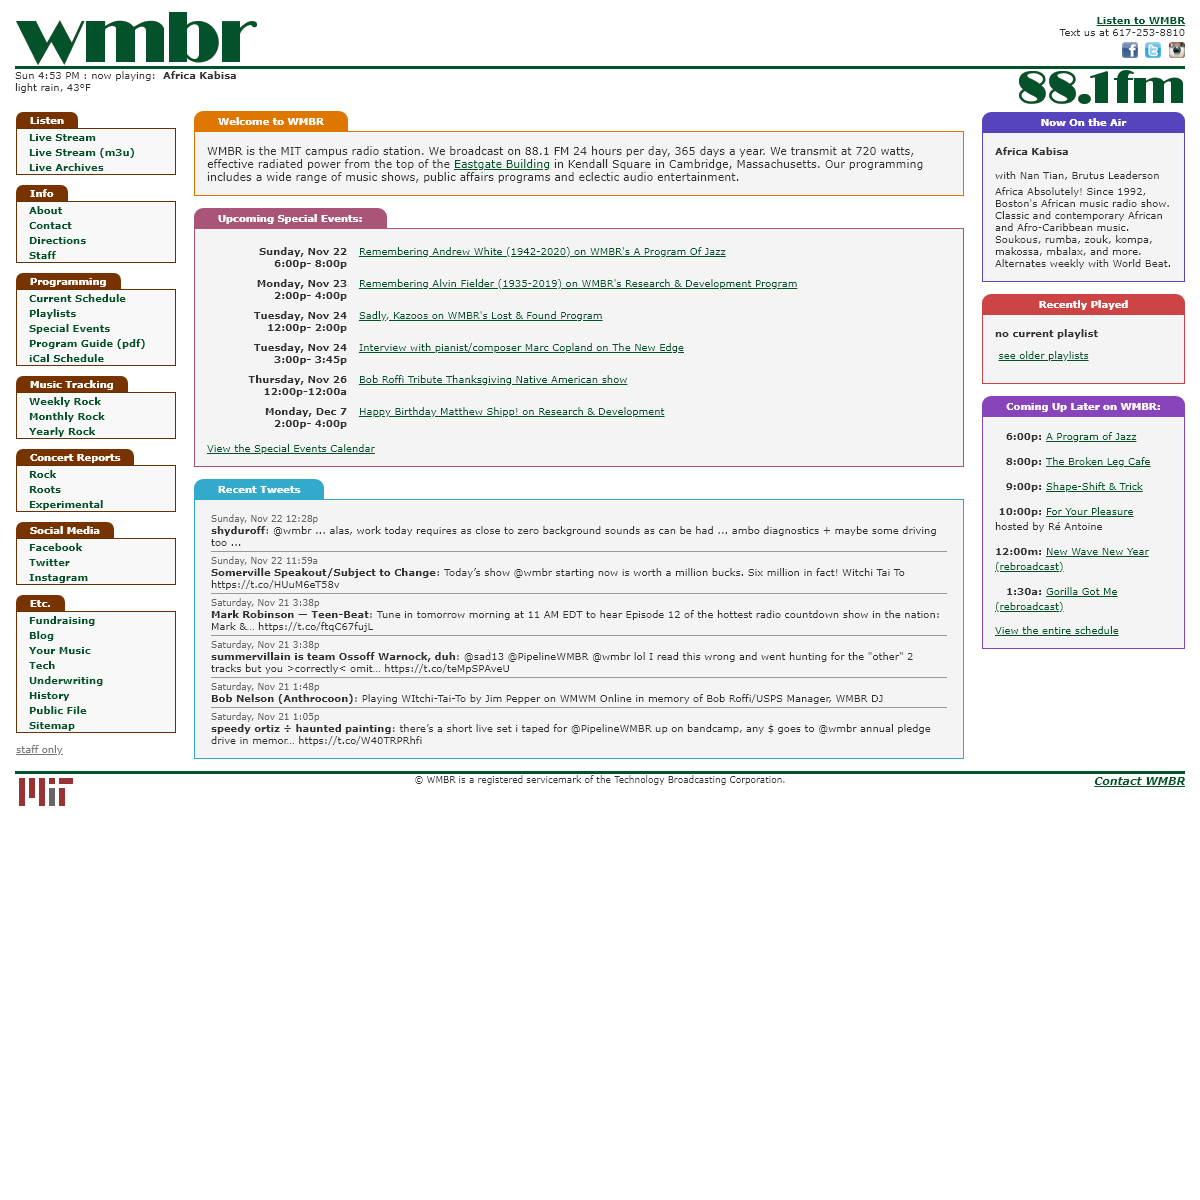 A complete backup of wmbr.org